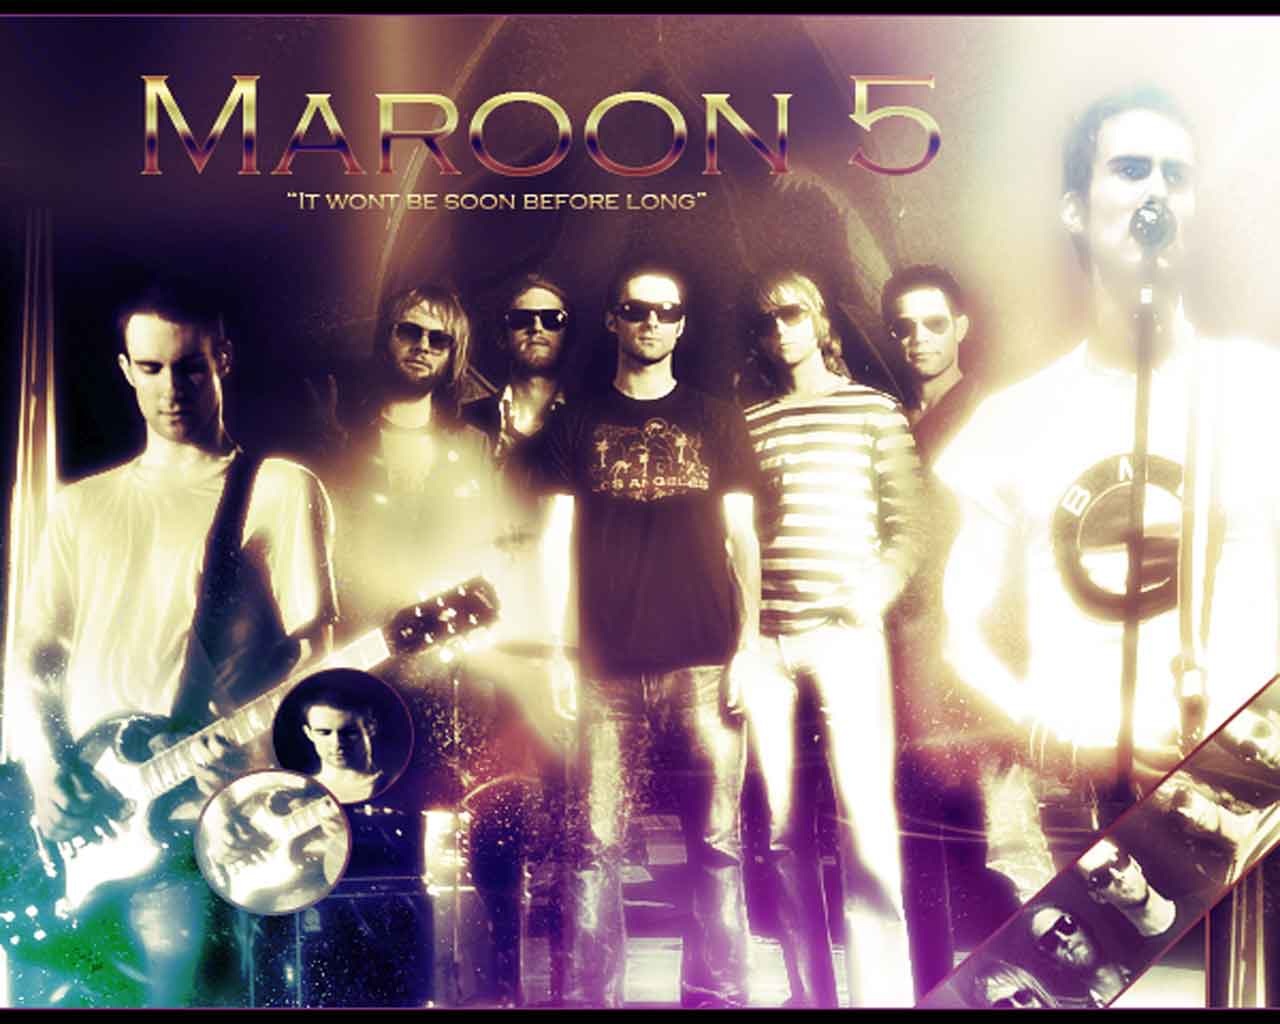 Top Related Pictures Maroon 5 Images for Pinterest